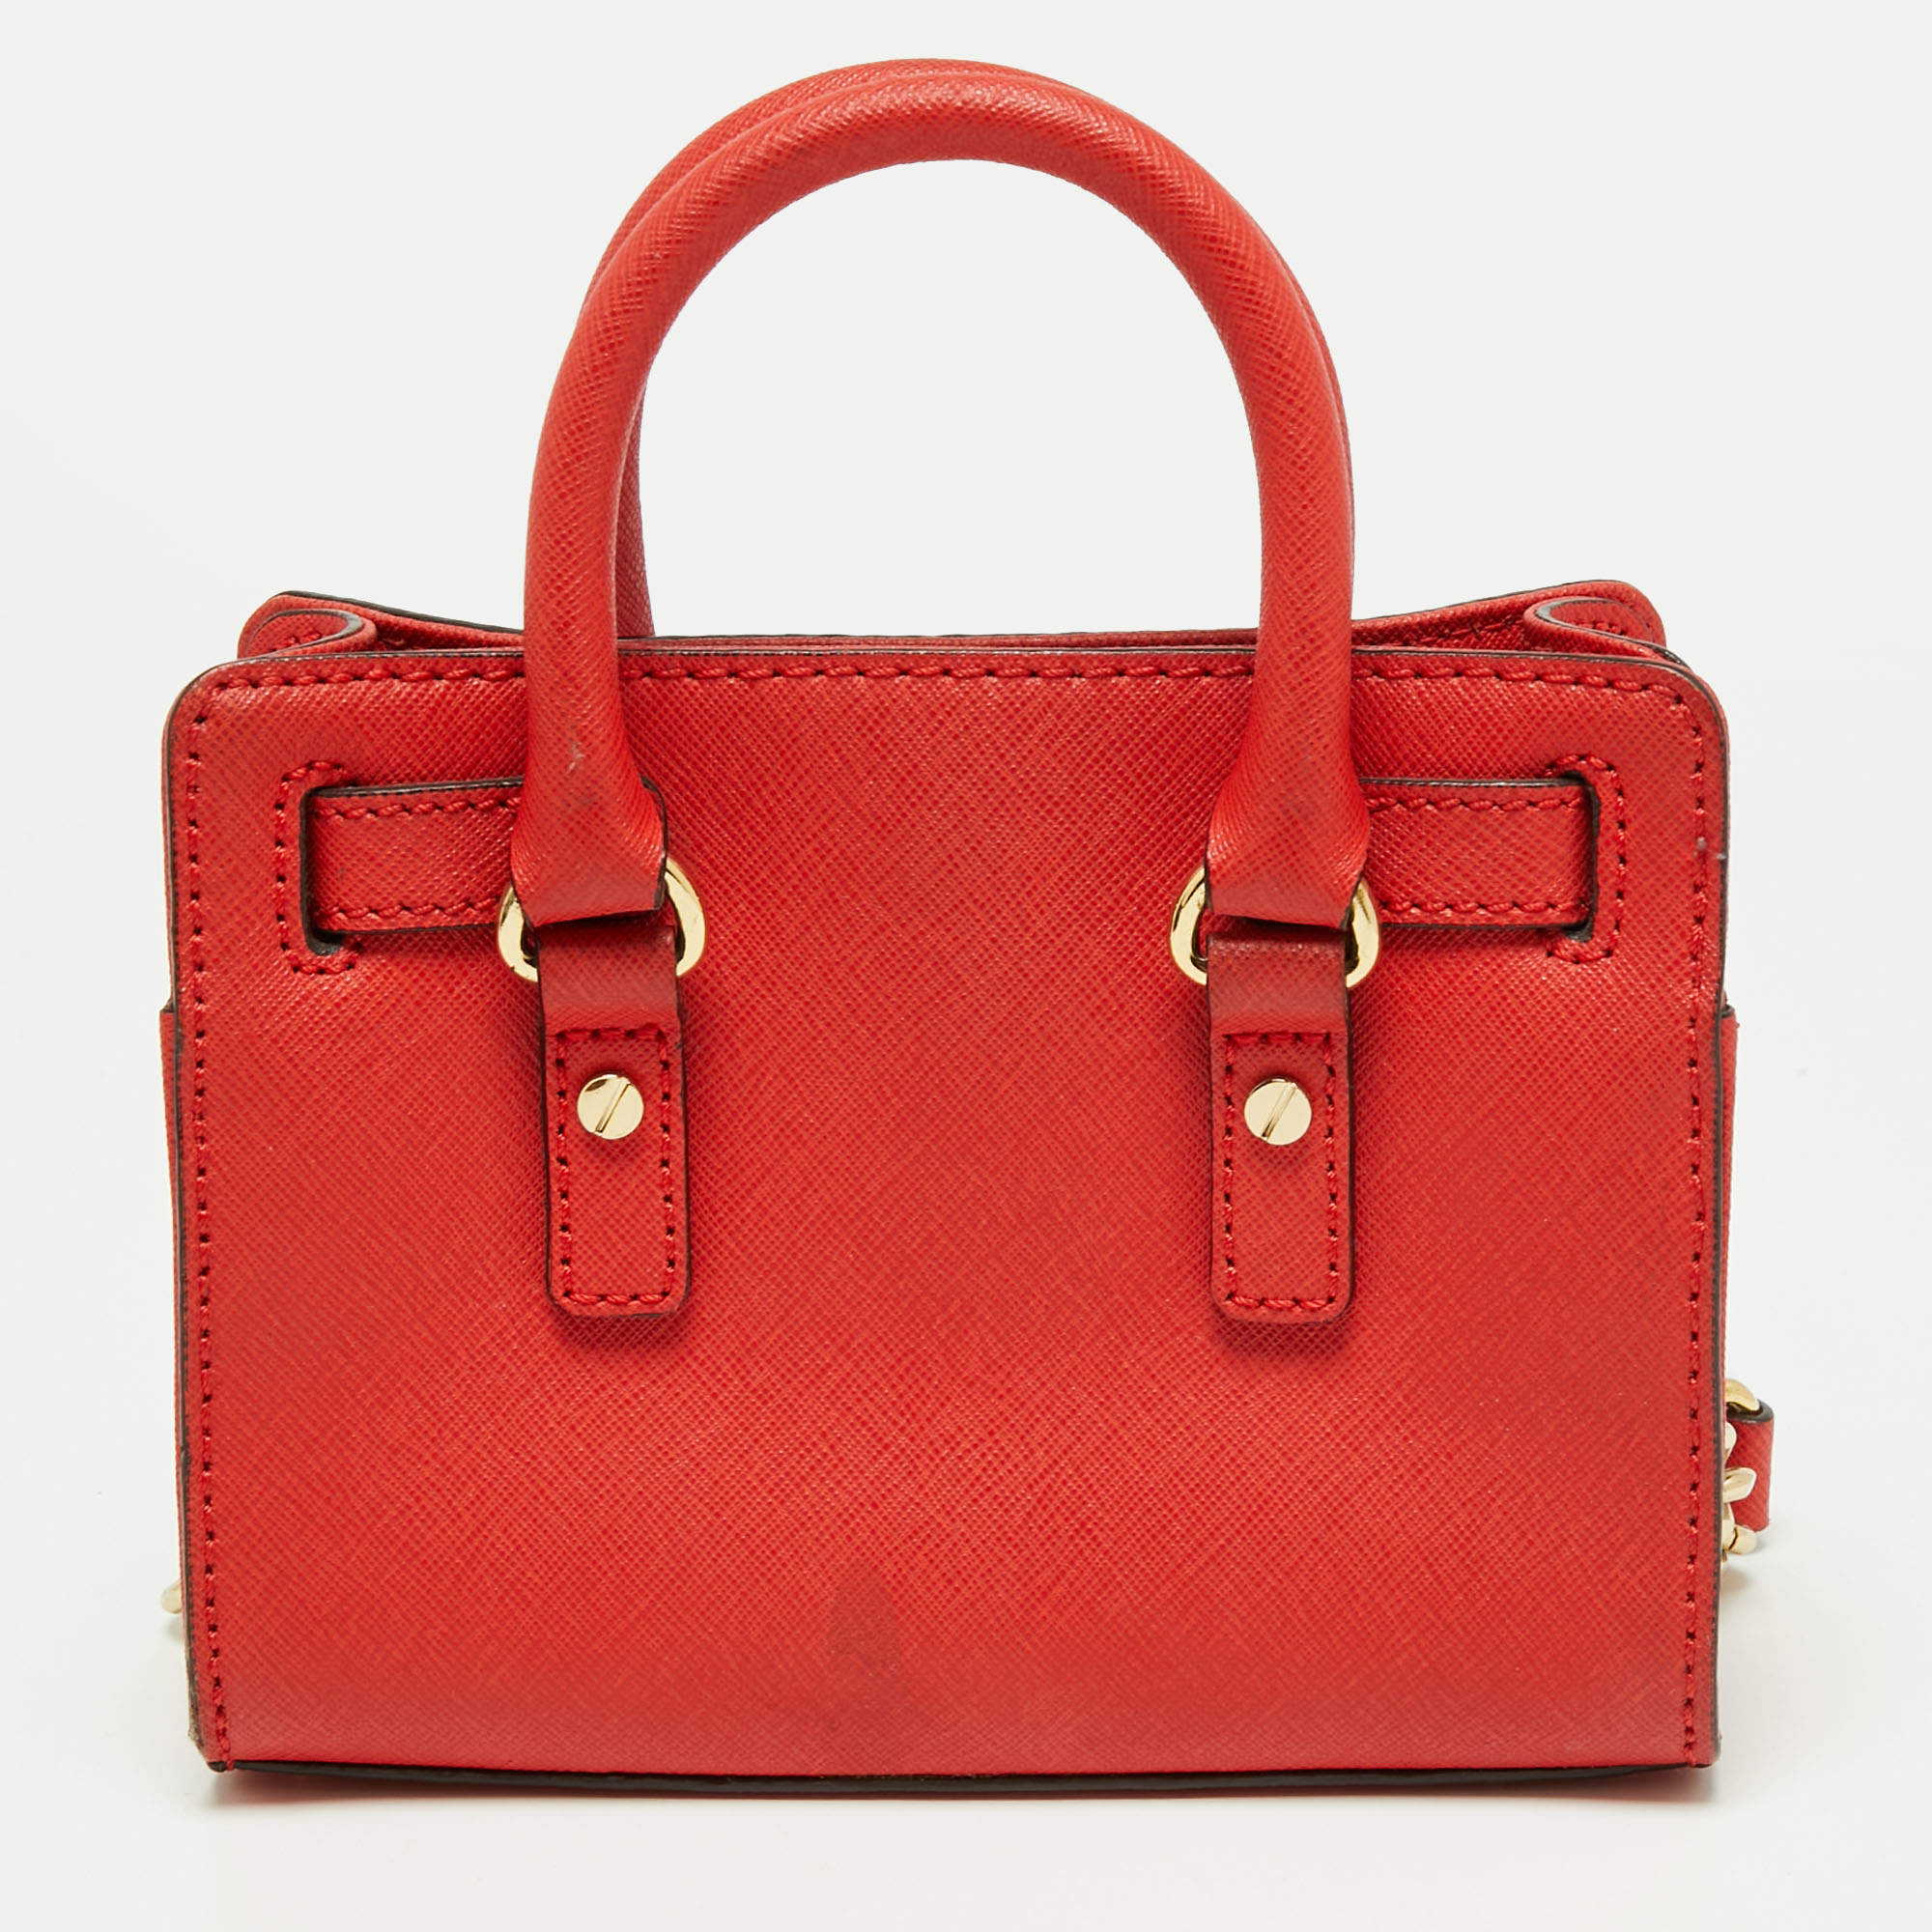 michael kors handbags red hamilton is there a outlet in denver